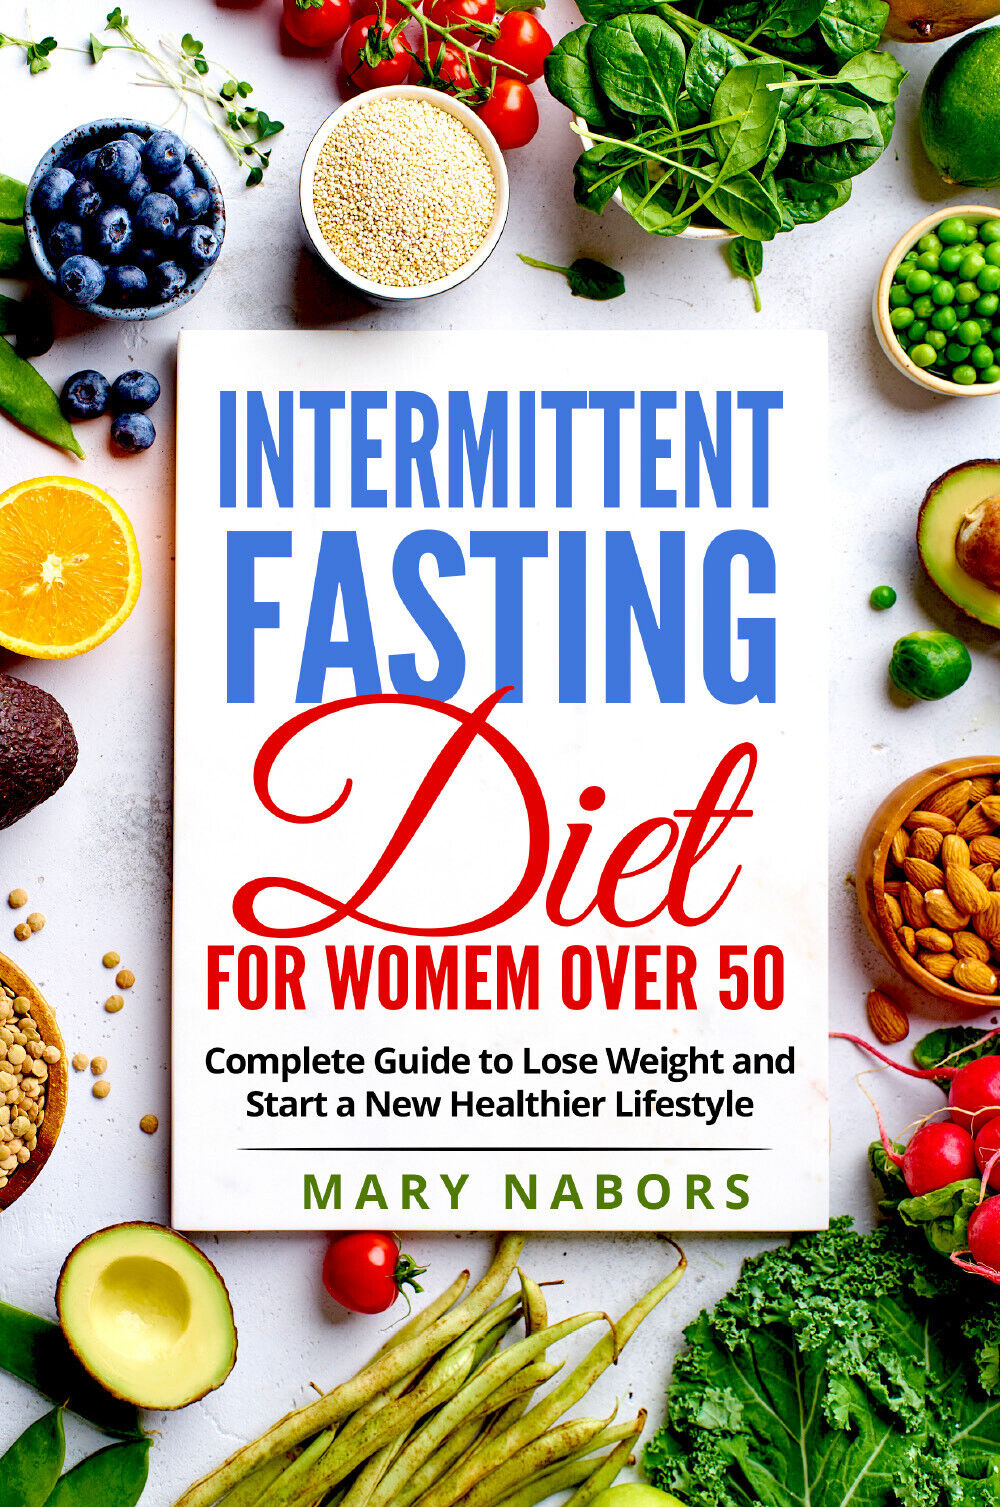 Intermittent fasting diet for women OVER 50 di Mary Nabors,  2021,  Youcanprint